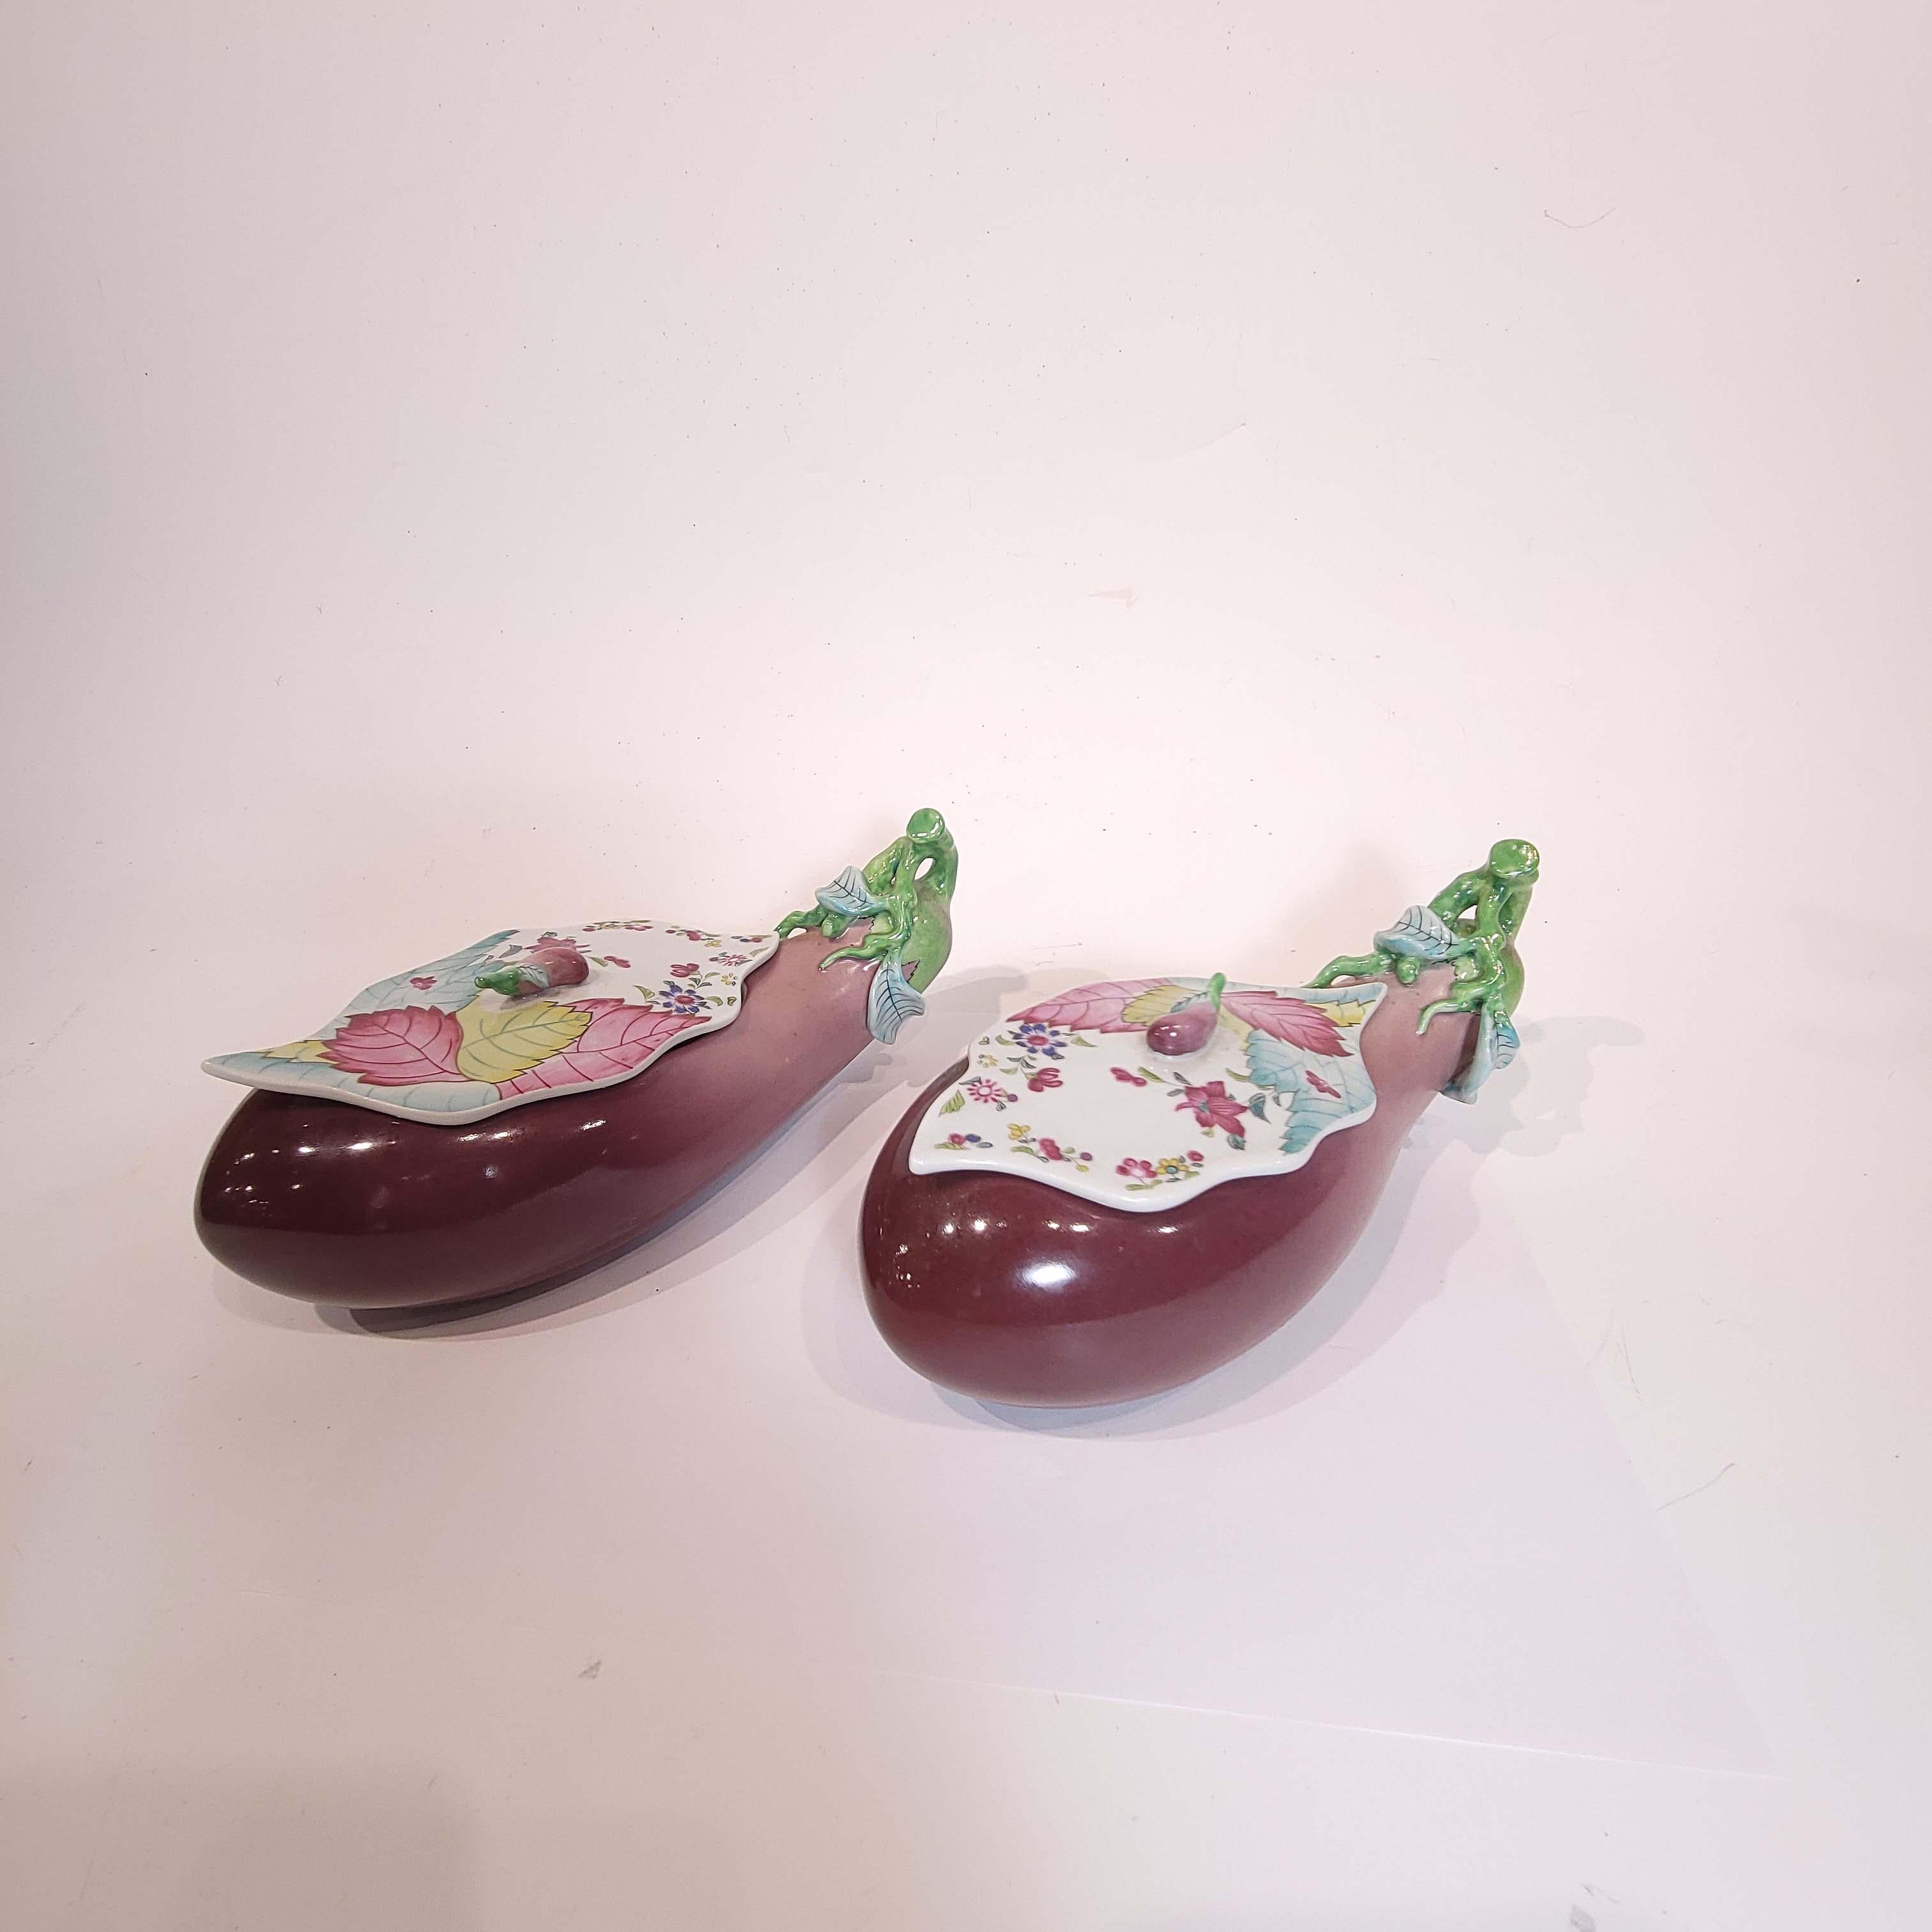 This pair of great quality Porcelain by Mottahedeh was made in prtughal and are reproduction of a rare Chinese Export Covered Eggplants in the Tobacco Leaf Pattern, Chien long Period (1736-1796)
These were made in the 2nd half of the 20th